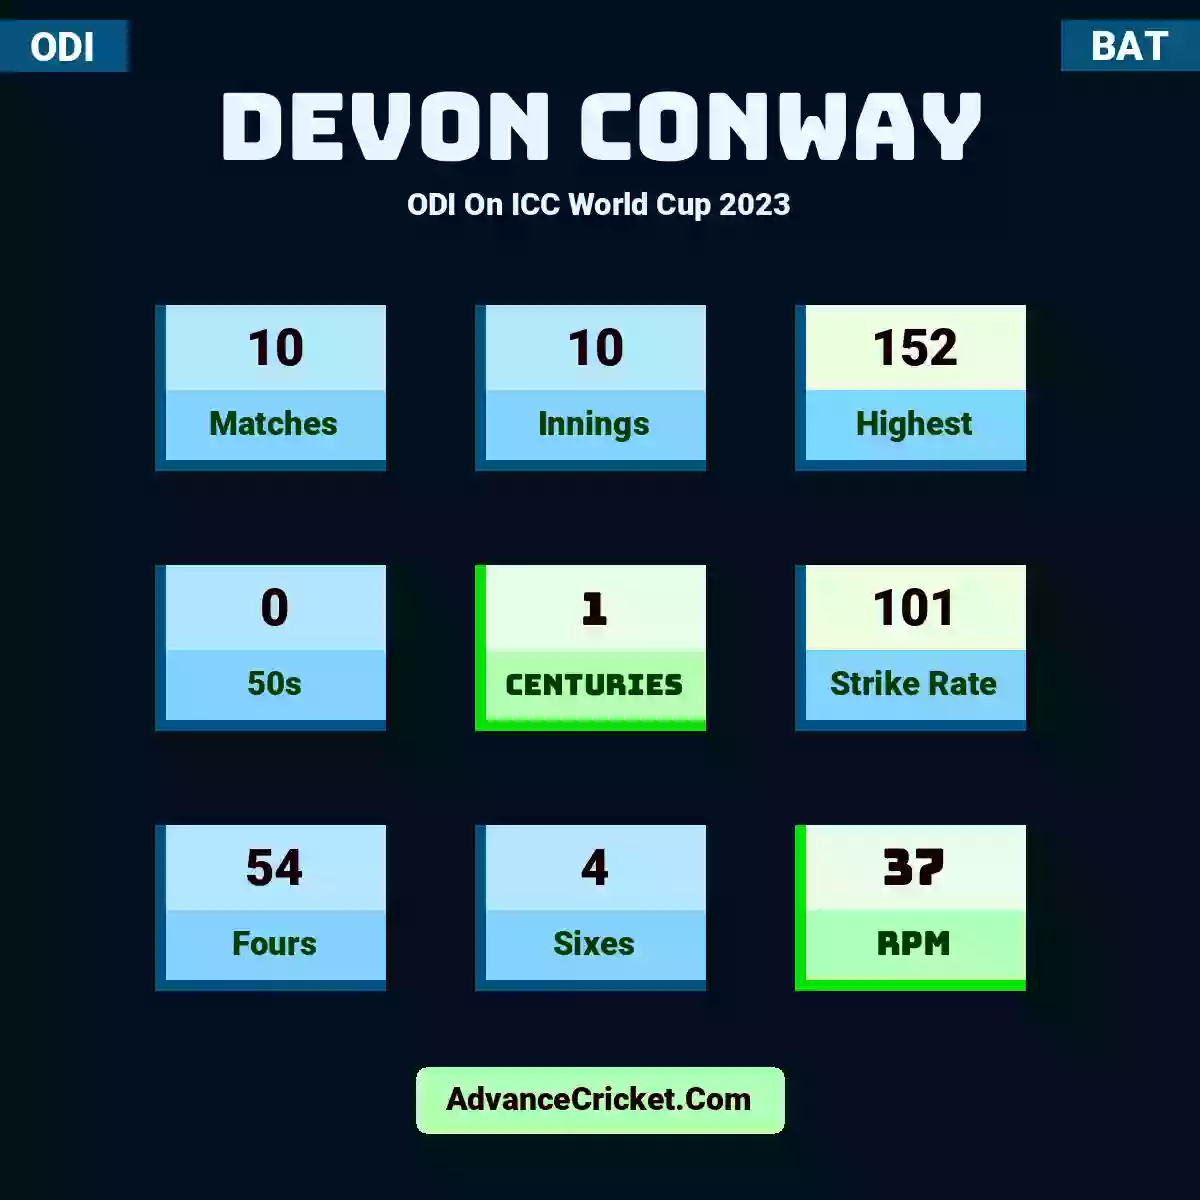 Devon Conway ODI  On ICC World Cup 2023, Devon Conway played 10 matches, scored 152 runs as highest, 0 half-centuries, and 1 centuries, with a strike rate of 101. D.Conway hit 54 fours and 4 sixes, with an RPM of 37.